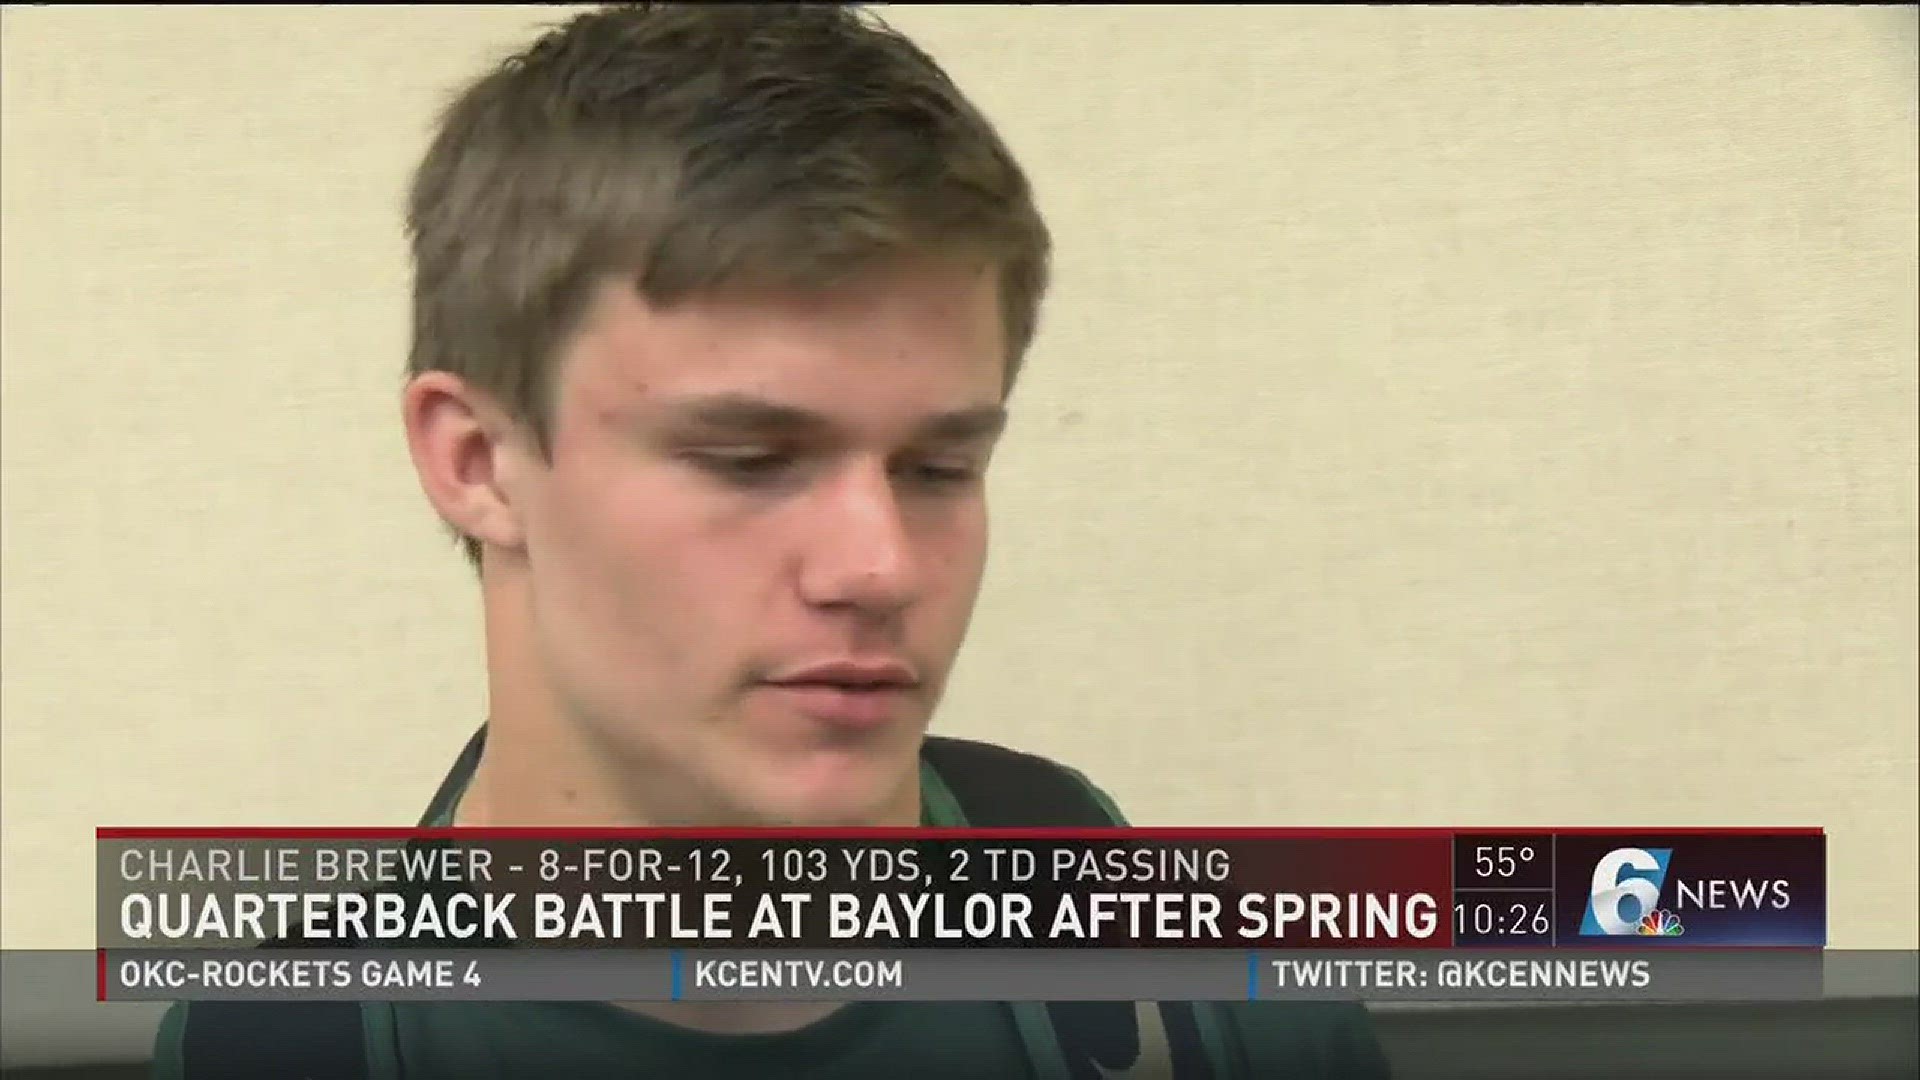 How do Charlie Brewer, Zach Smith and Anu Solomon feel about the QB battle after Spring Football at Baylor?